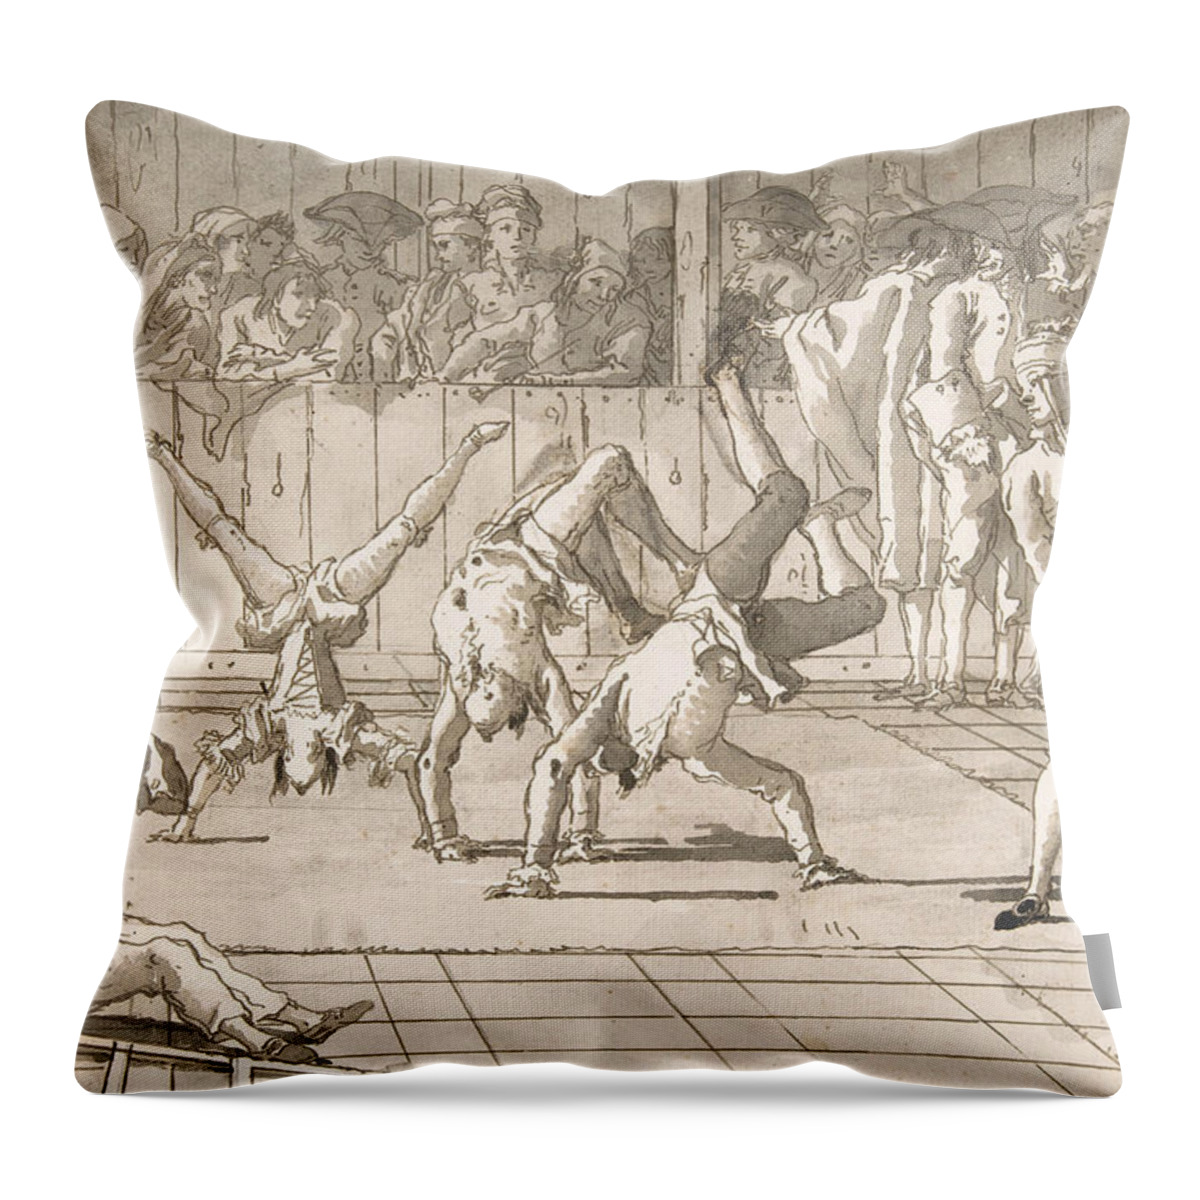 18th Century Art Throw Pillow featuring the drawing Scene of Contemporary Life - The Acrobats by Giovanni Domenico Tiepolo